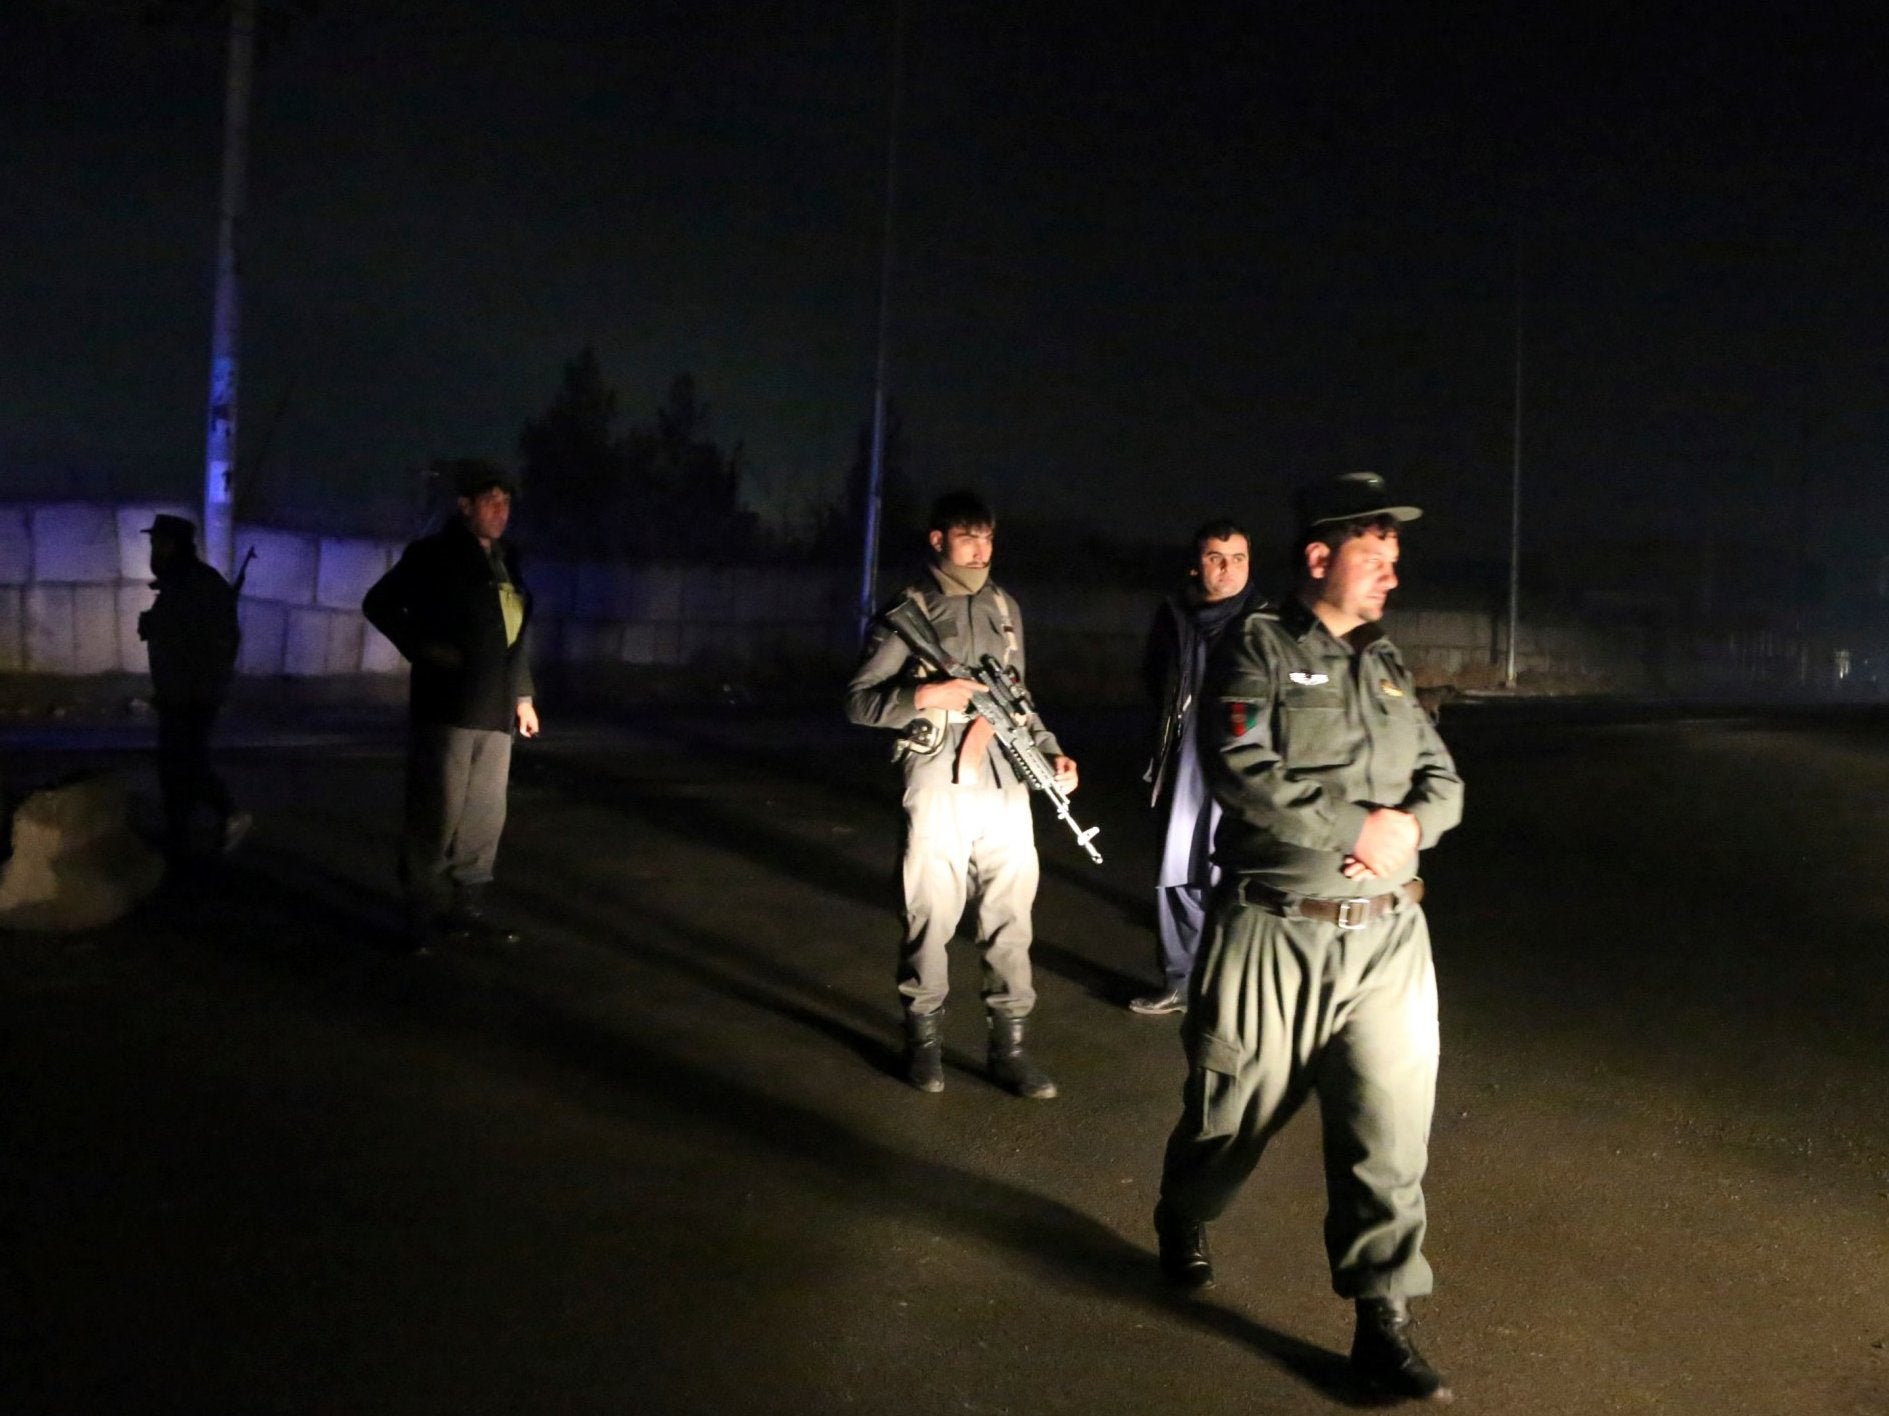 Security forces block the roads at the site of a suicide bomb attack in Kabul, Afghanistan